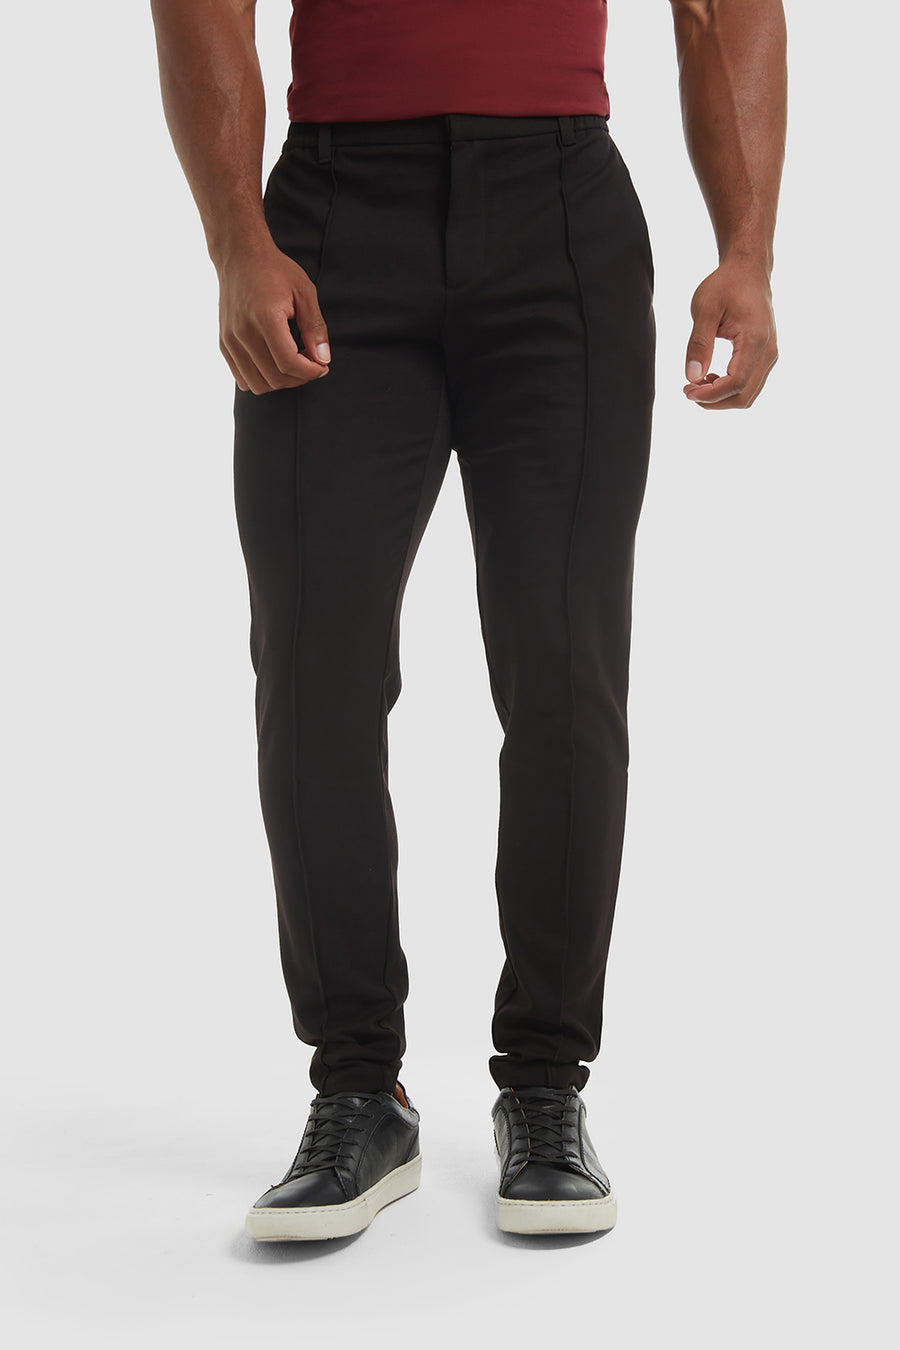 Stitched Crease Pants in Black - TAILORED ATHLETE - USA